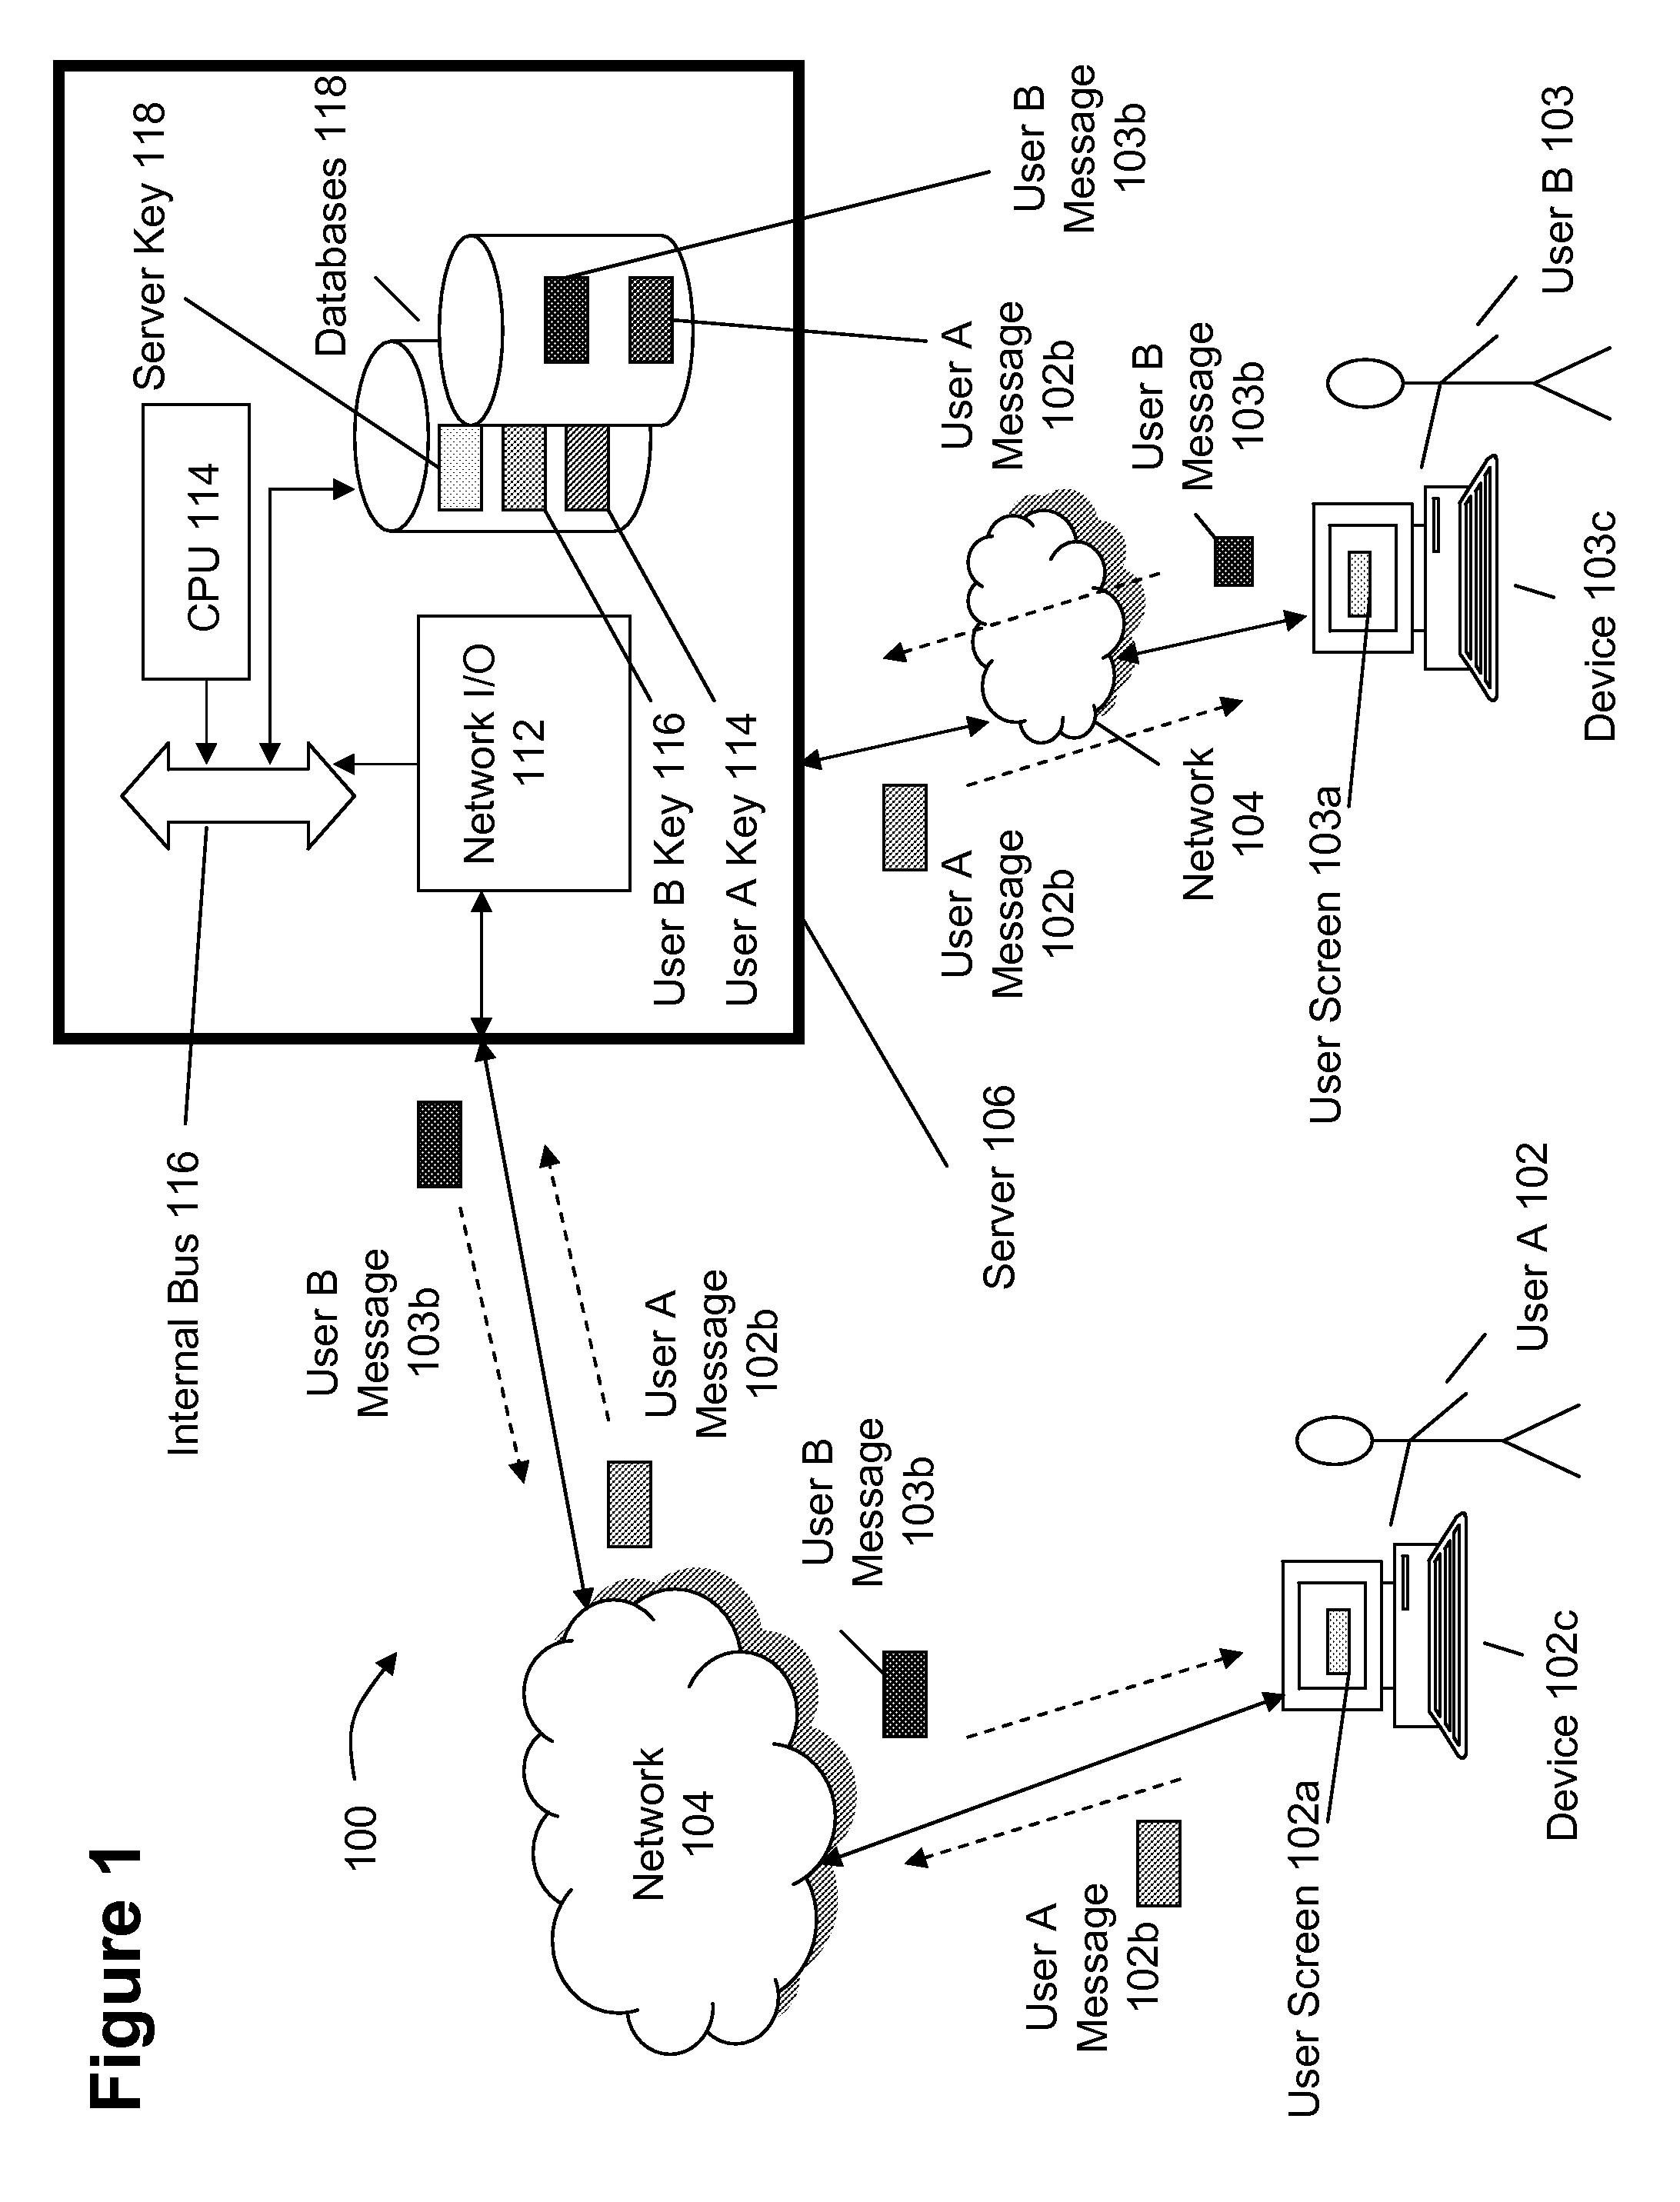 System and method for transforming a thread of email messages into a real-time meeting